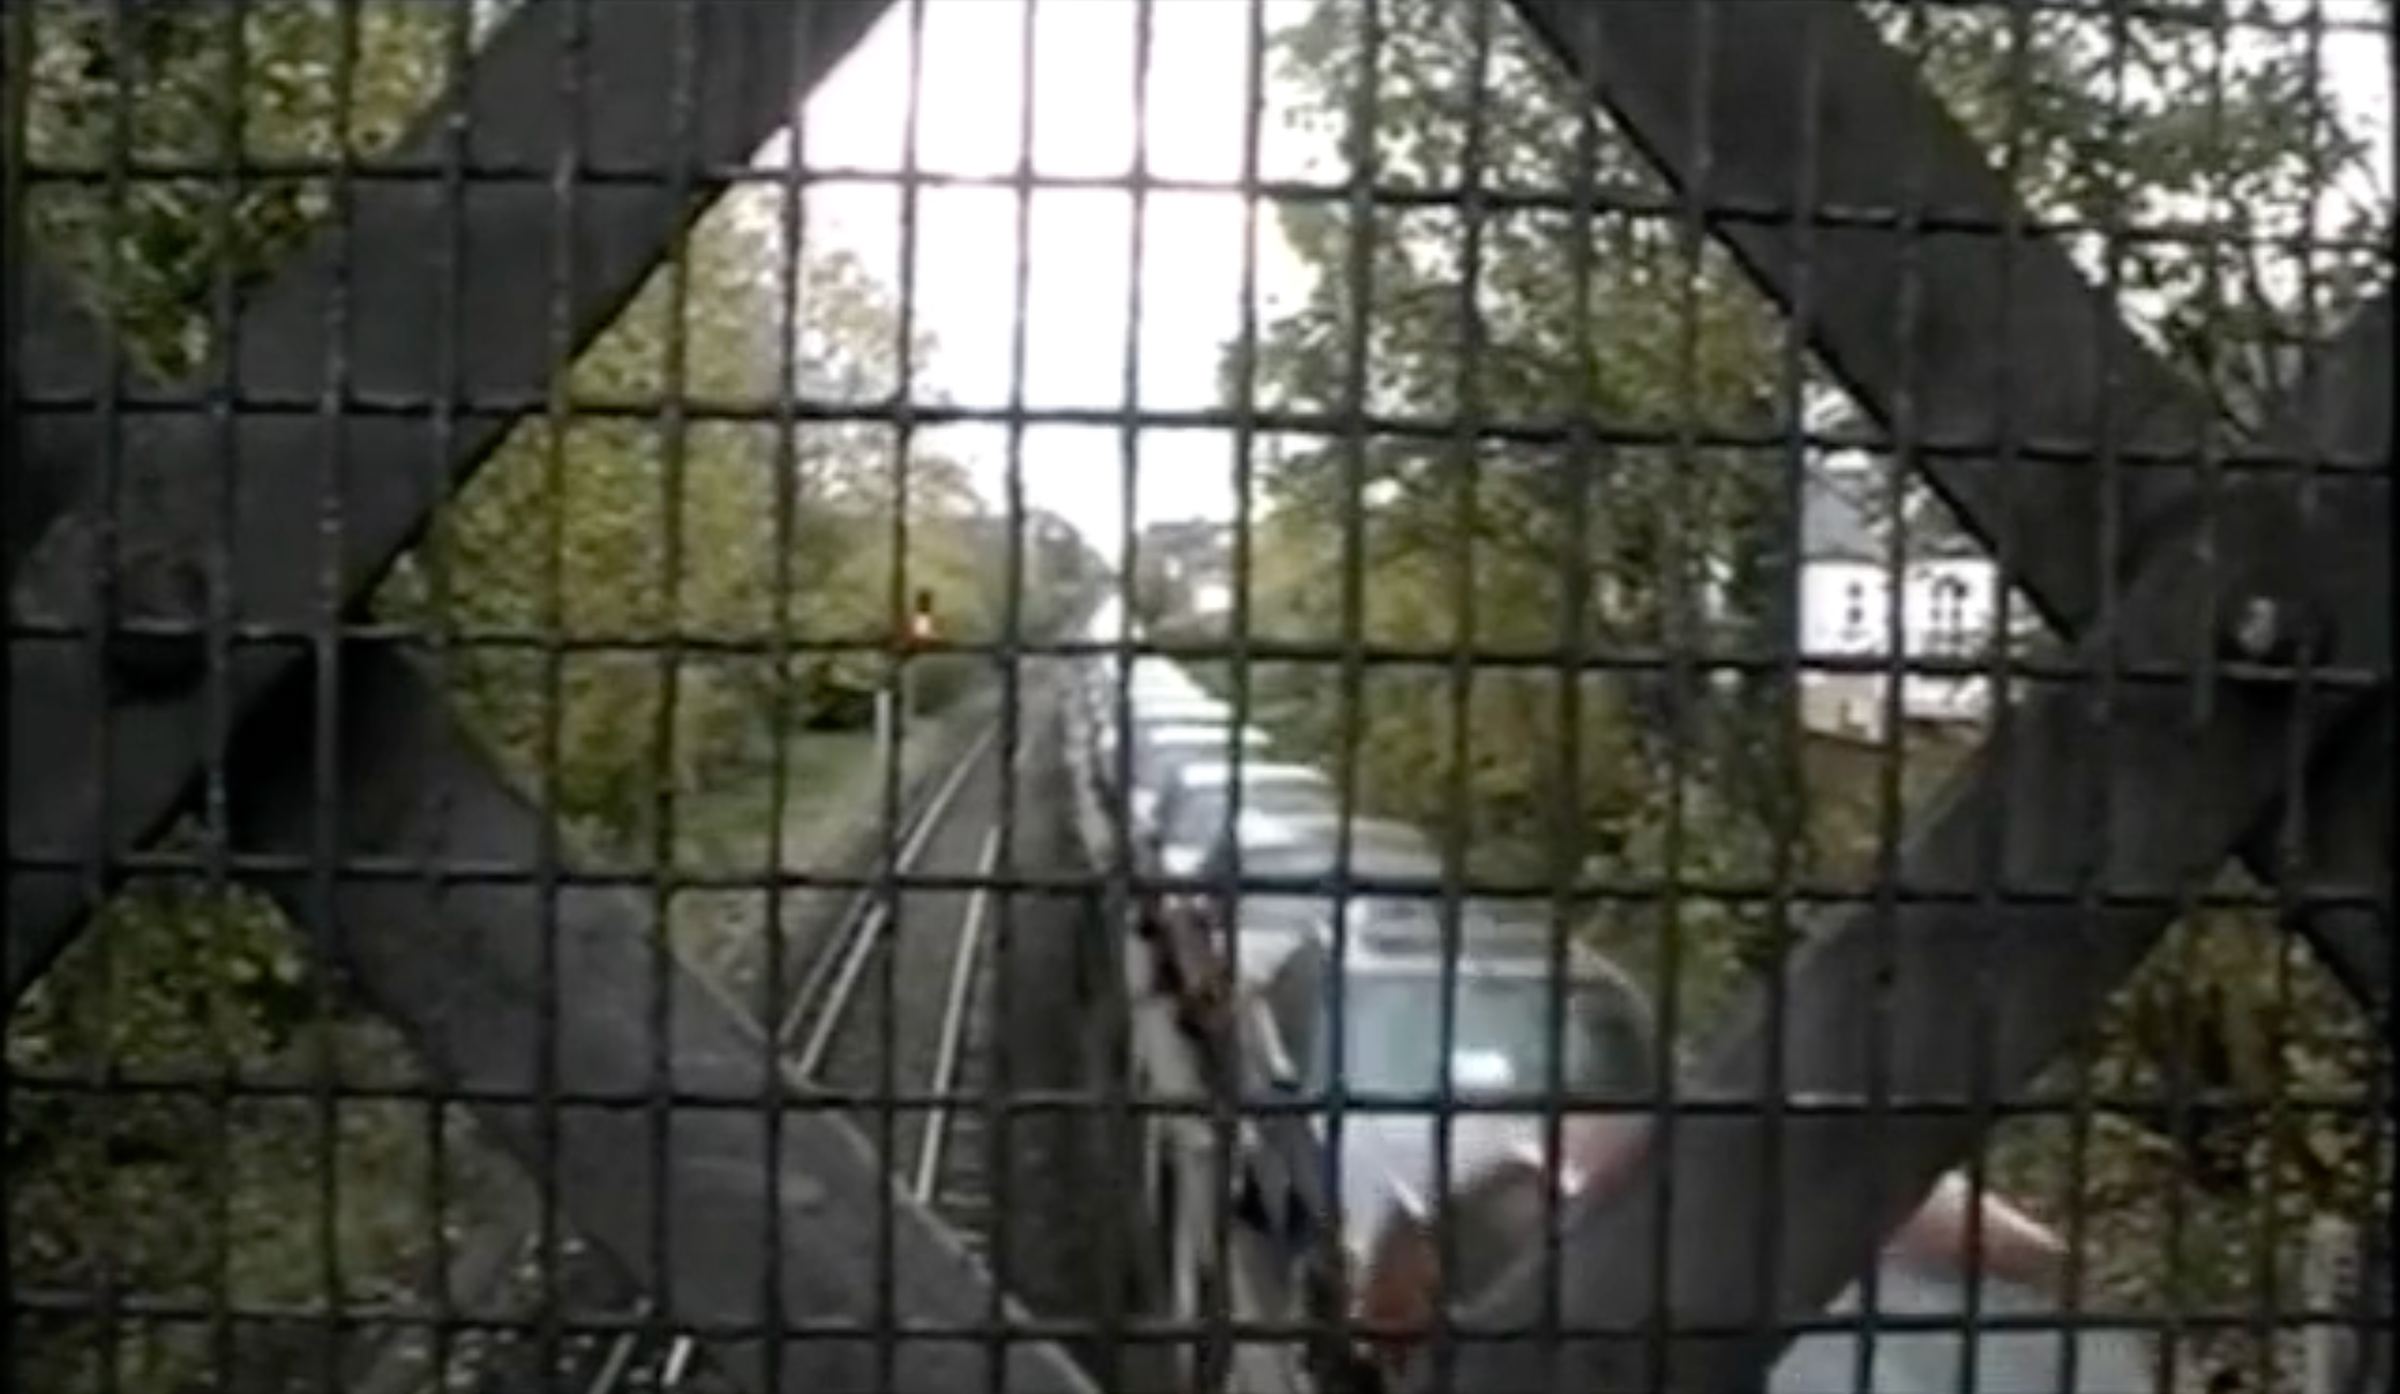 Image taken from a bridge looking down to train tracks below through a metal fence. A train goes past carrying cars.